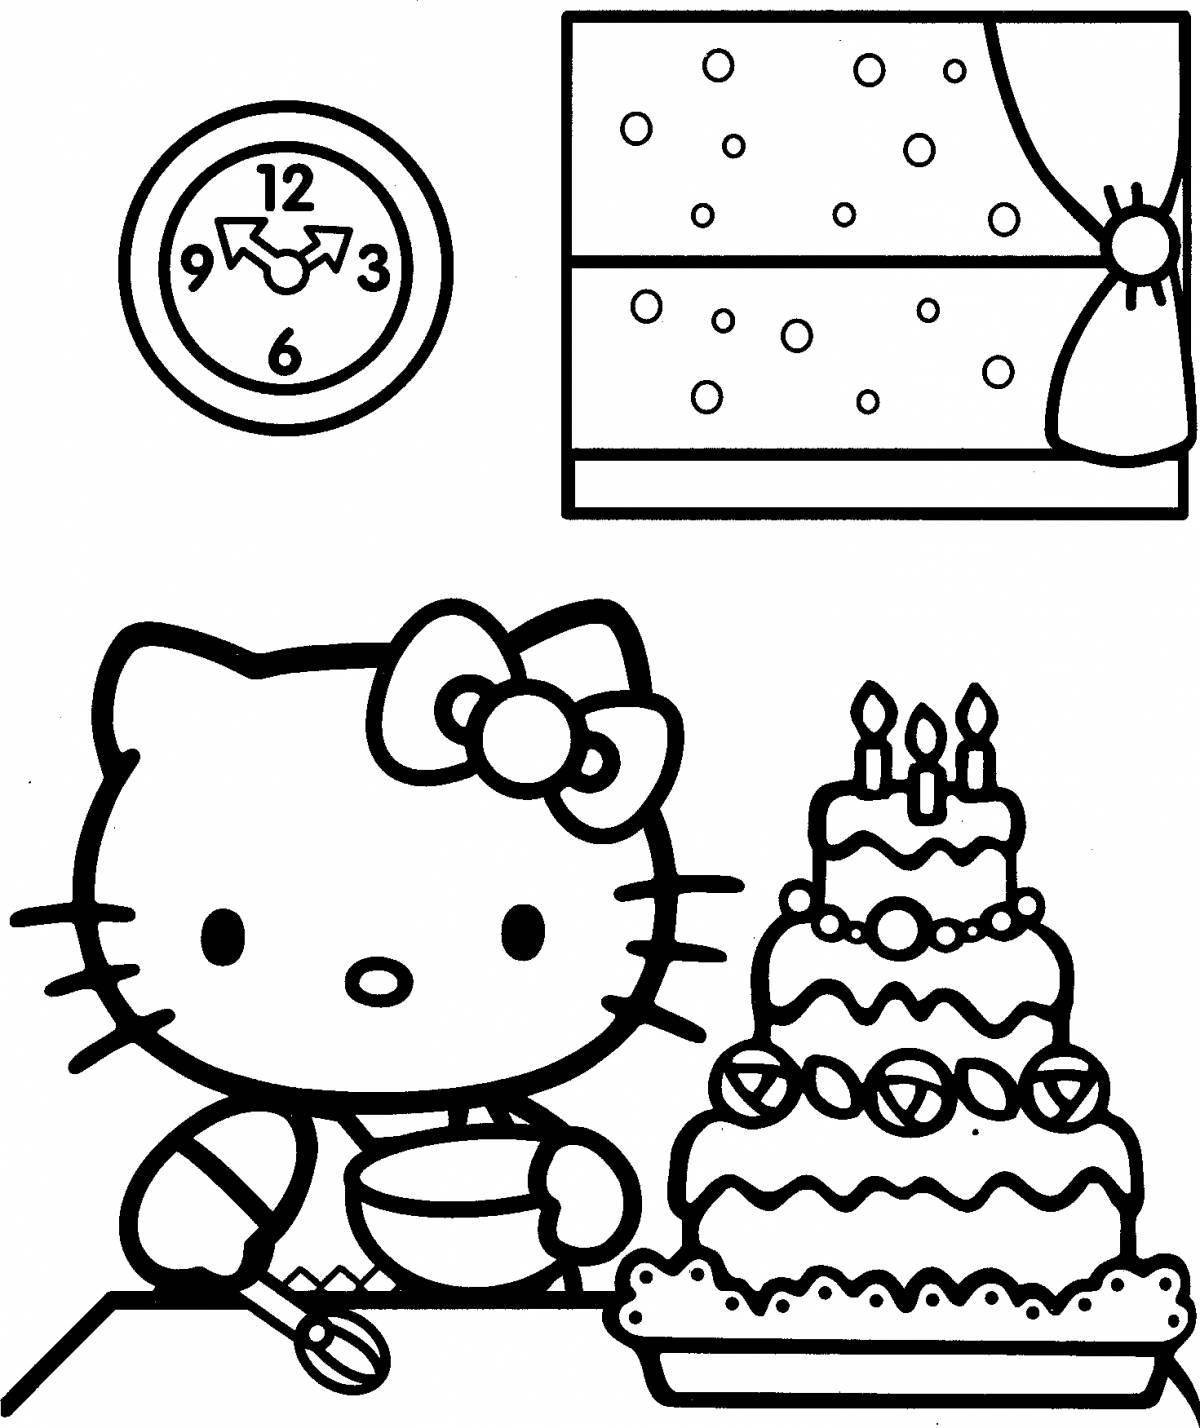 Sparkly hello kitty mermaid coloring page